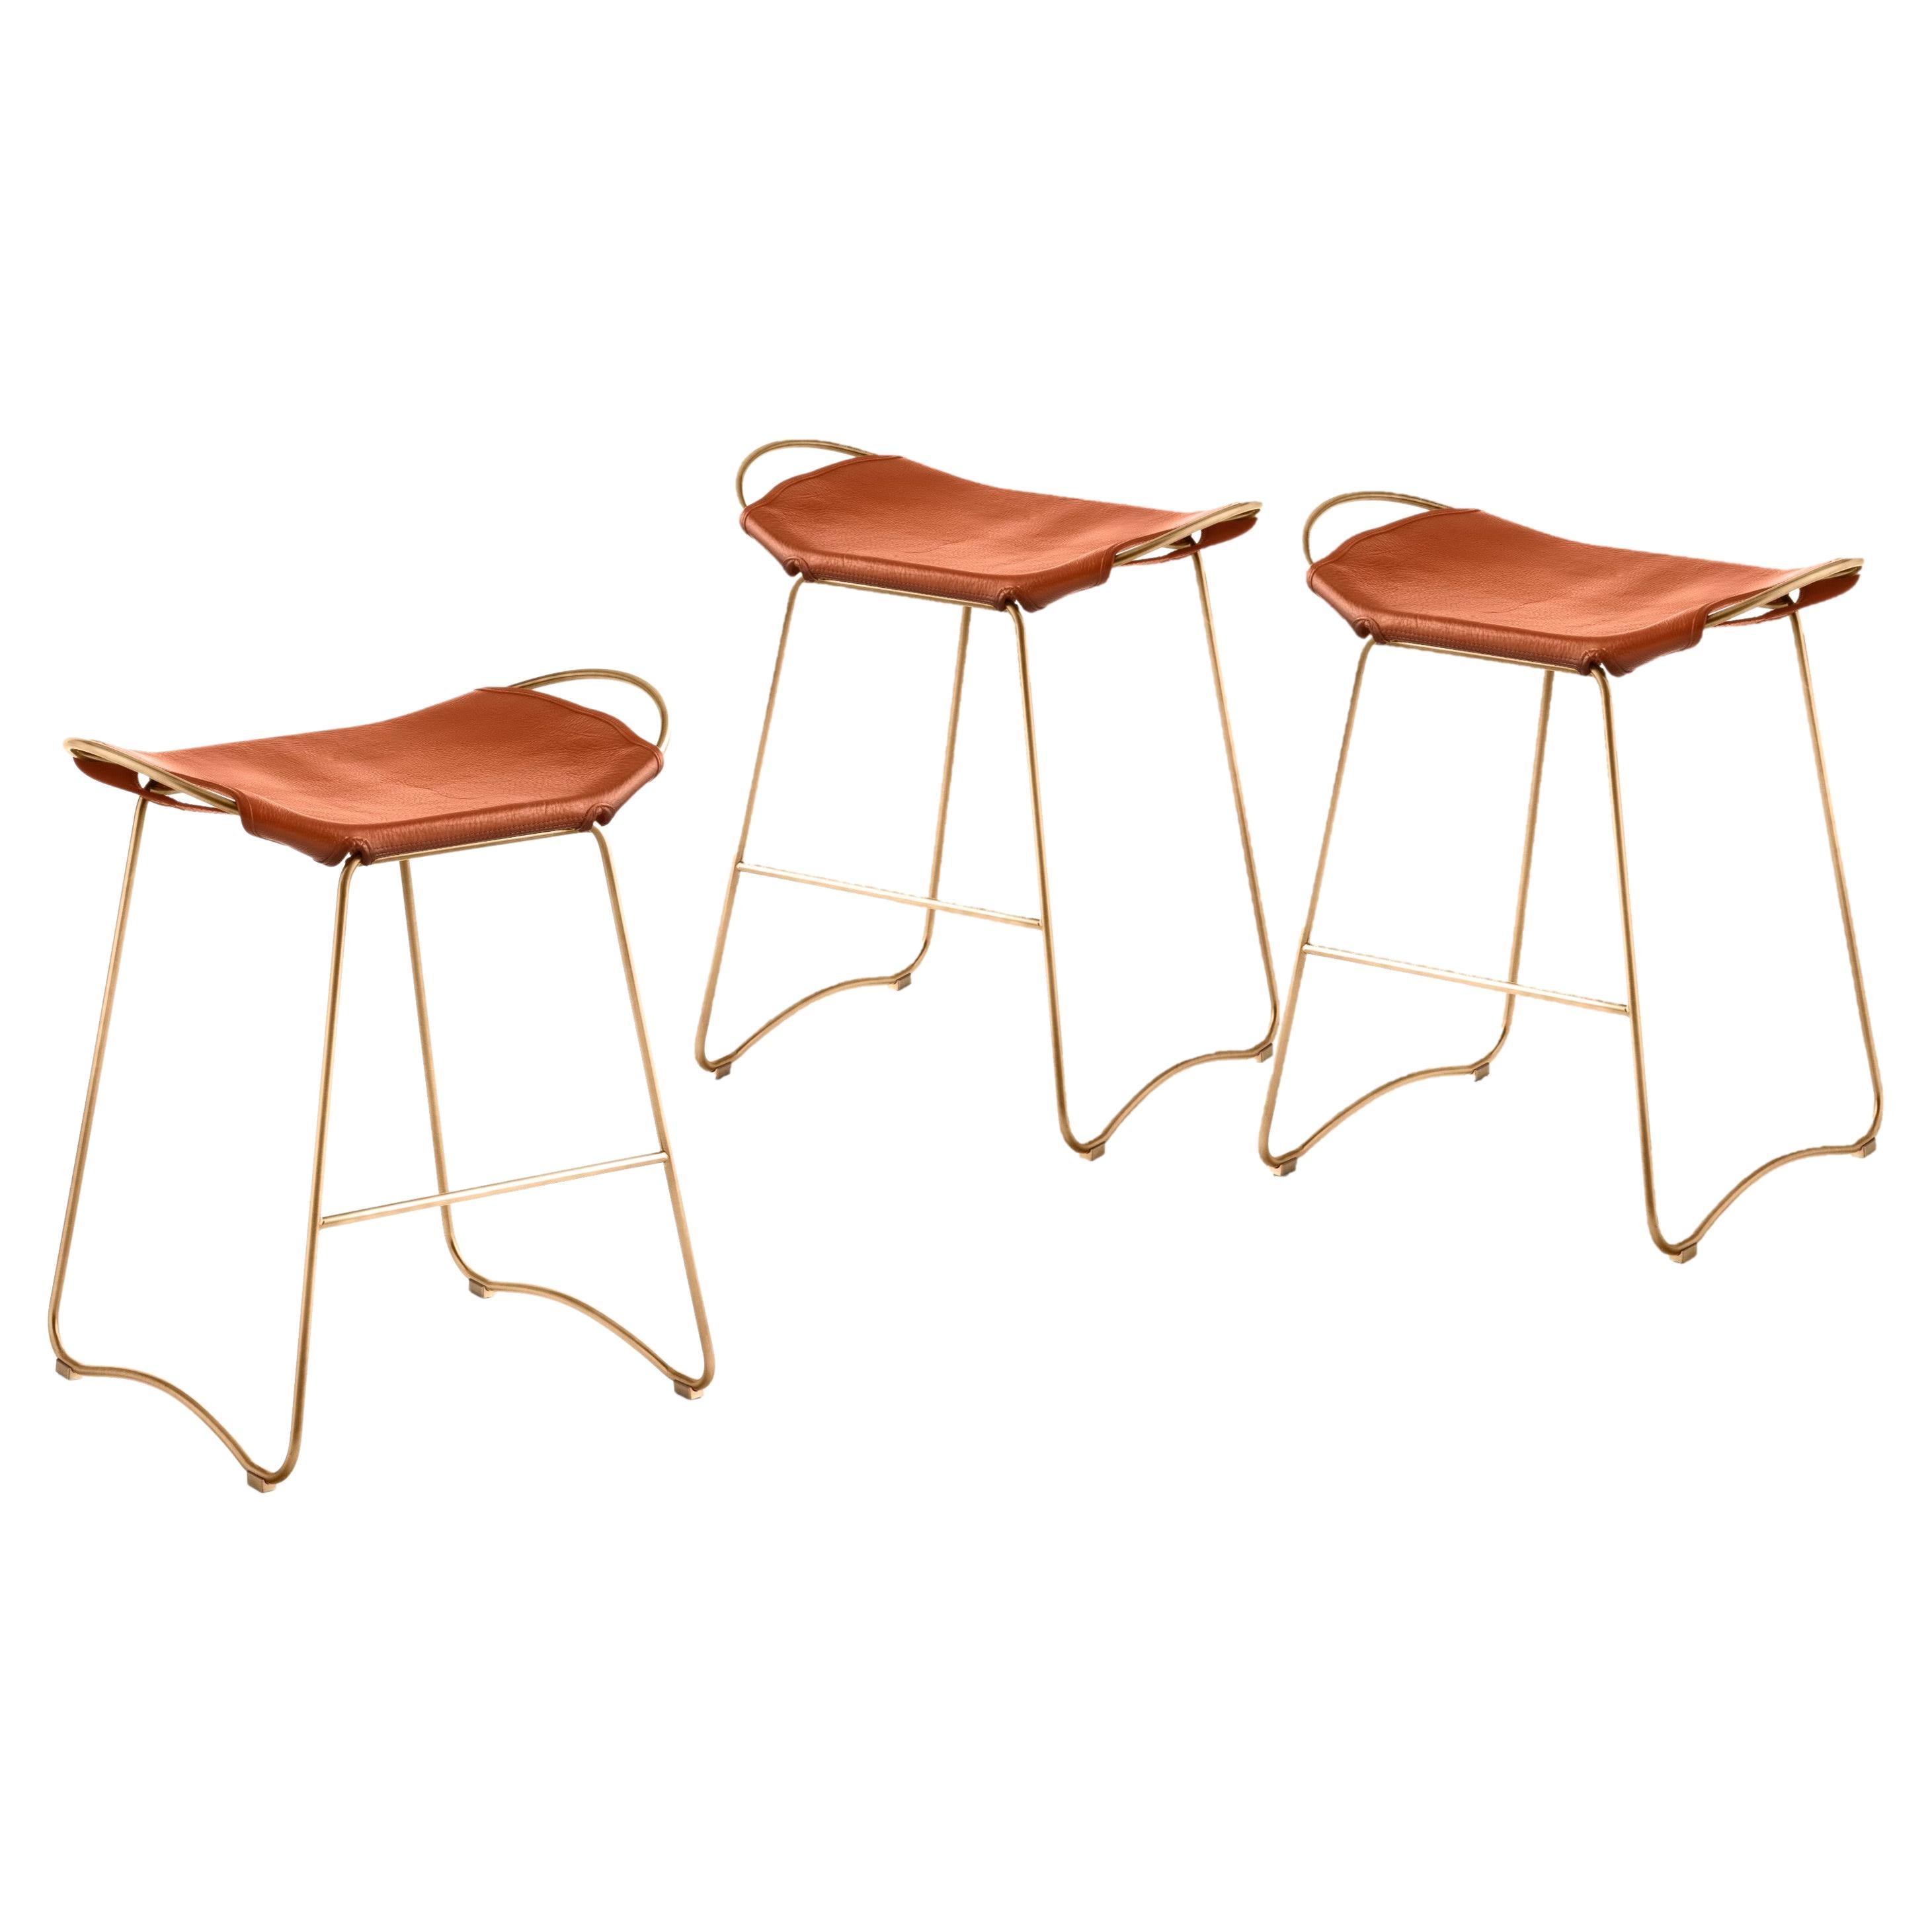 Set of 3 Contemporary Kitchen Counter Barstool Brass Metal & Tobacco Tan Leather